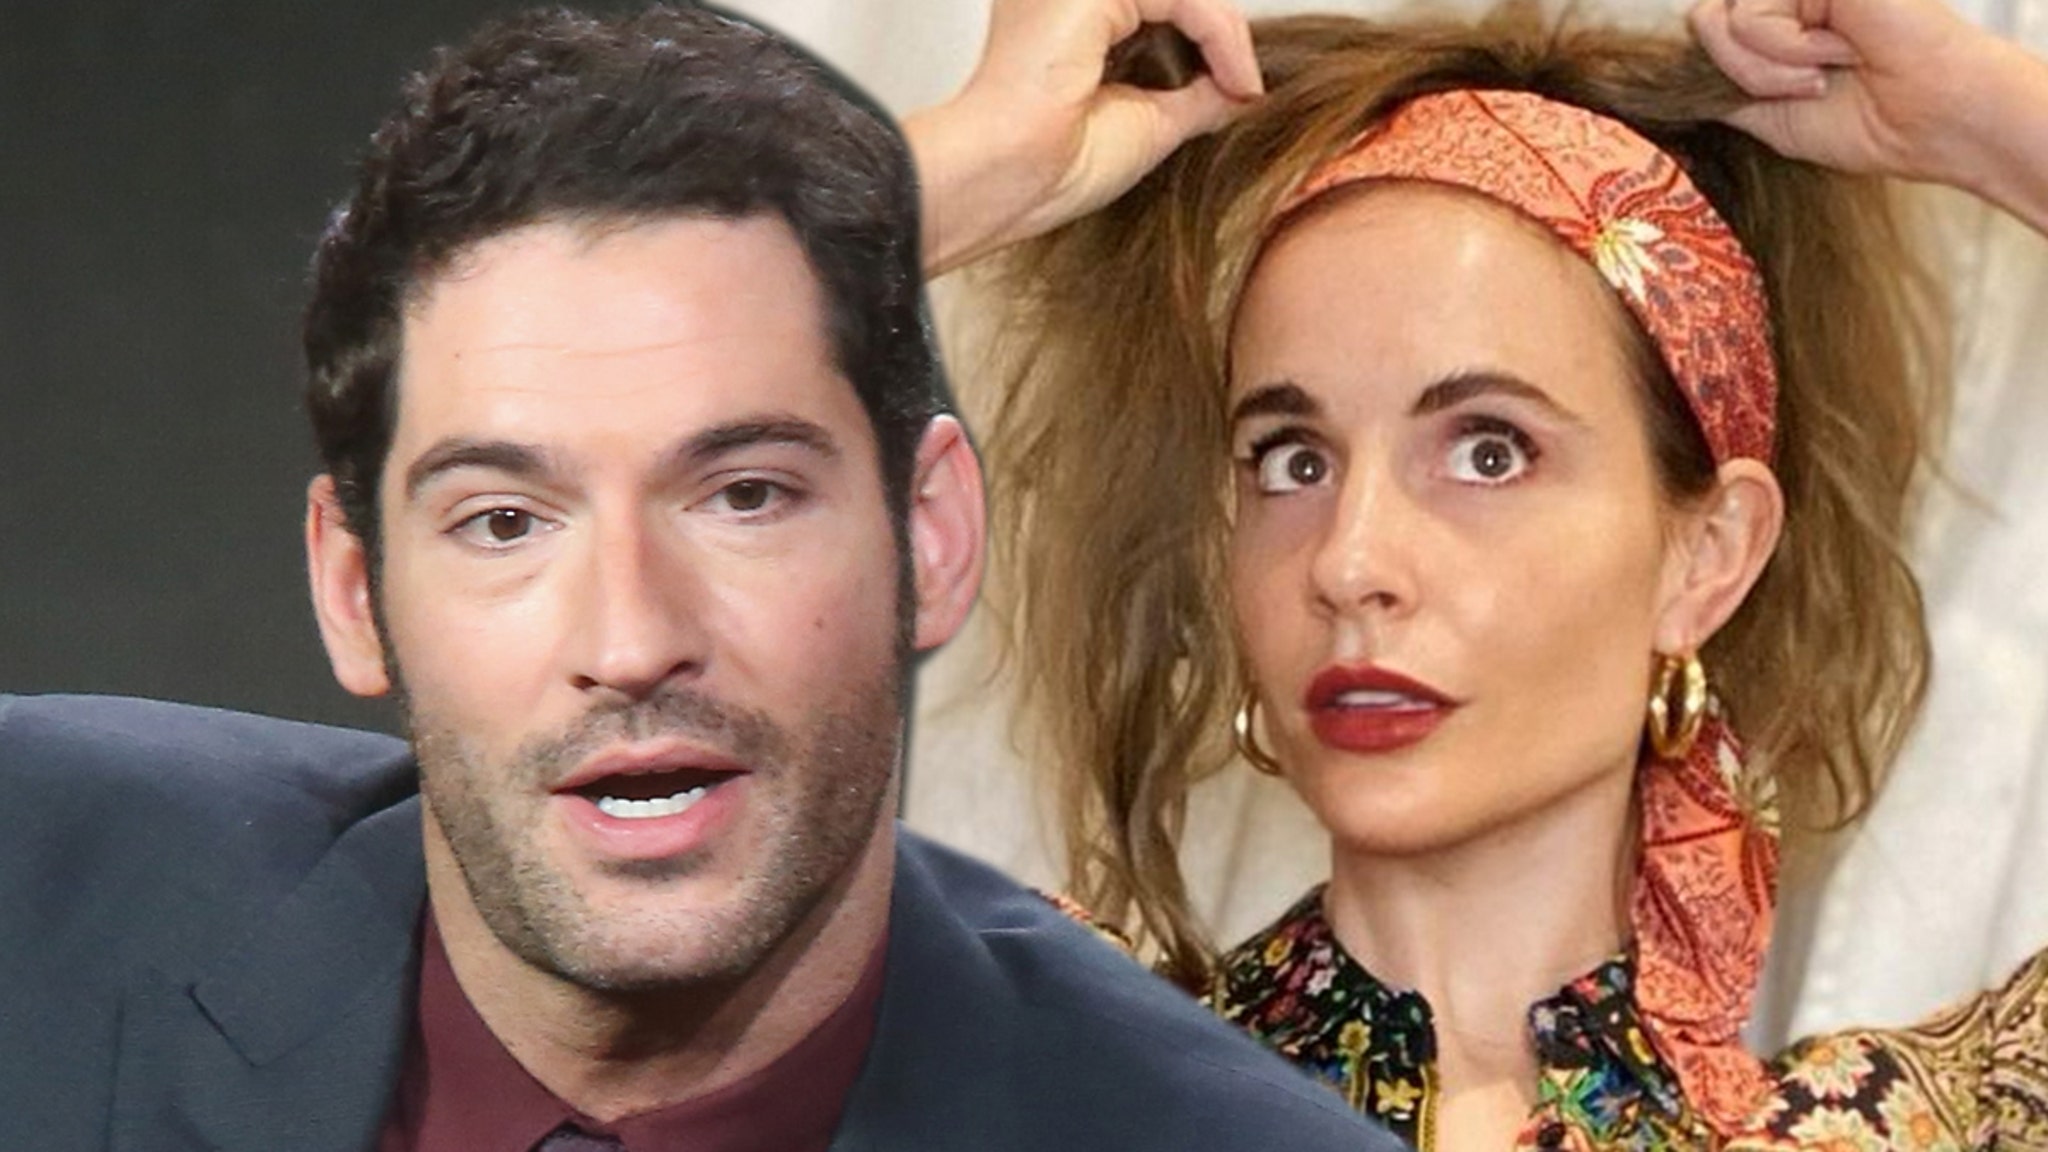 ‘Lucifer’ star Tom Ellis gets creepy package in the mail, police investigate